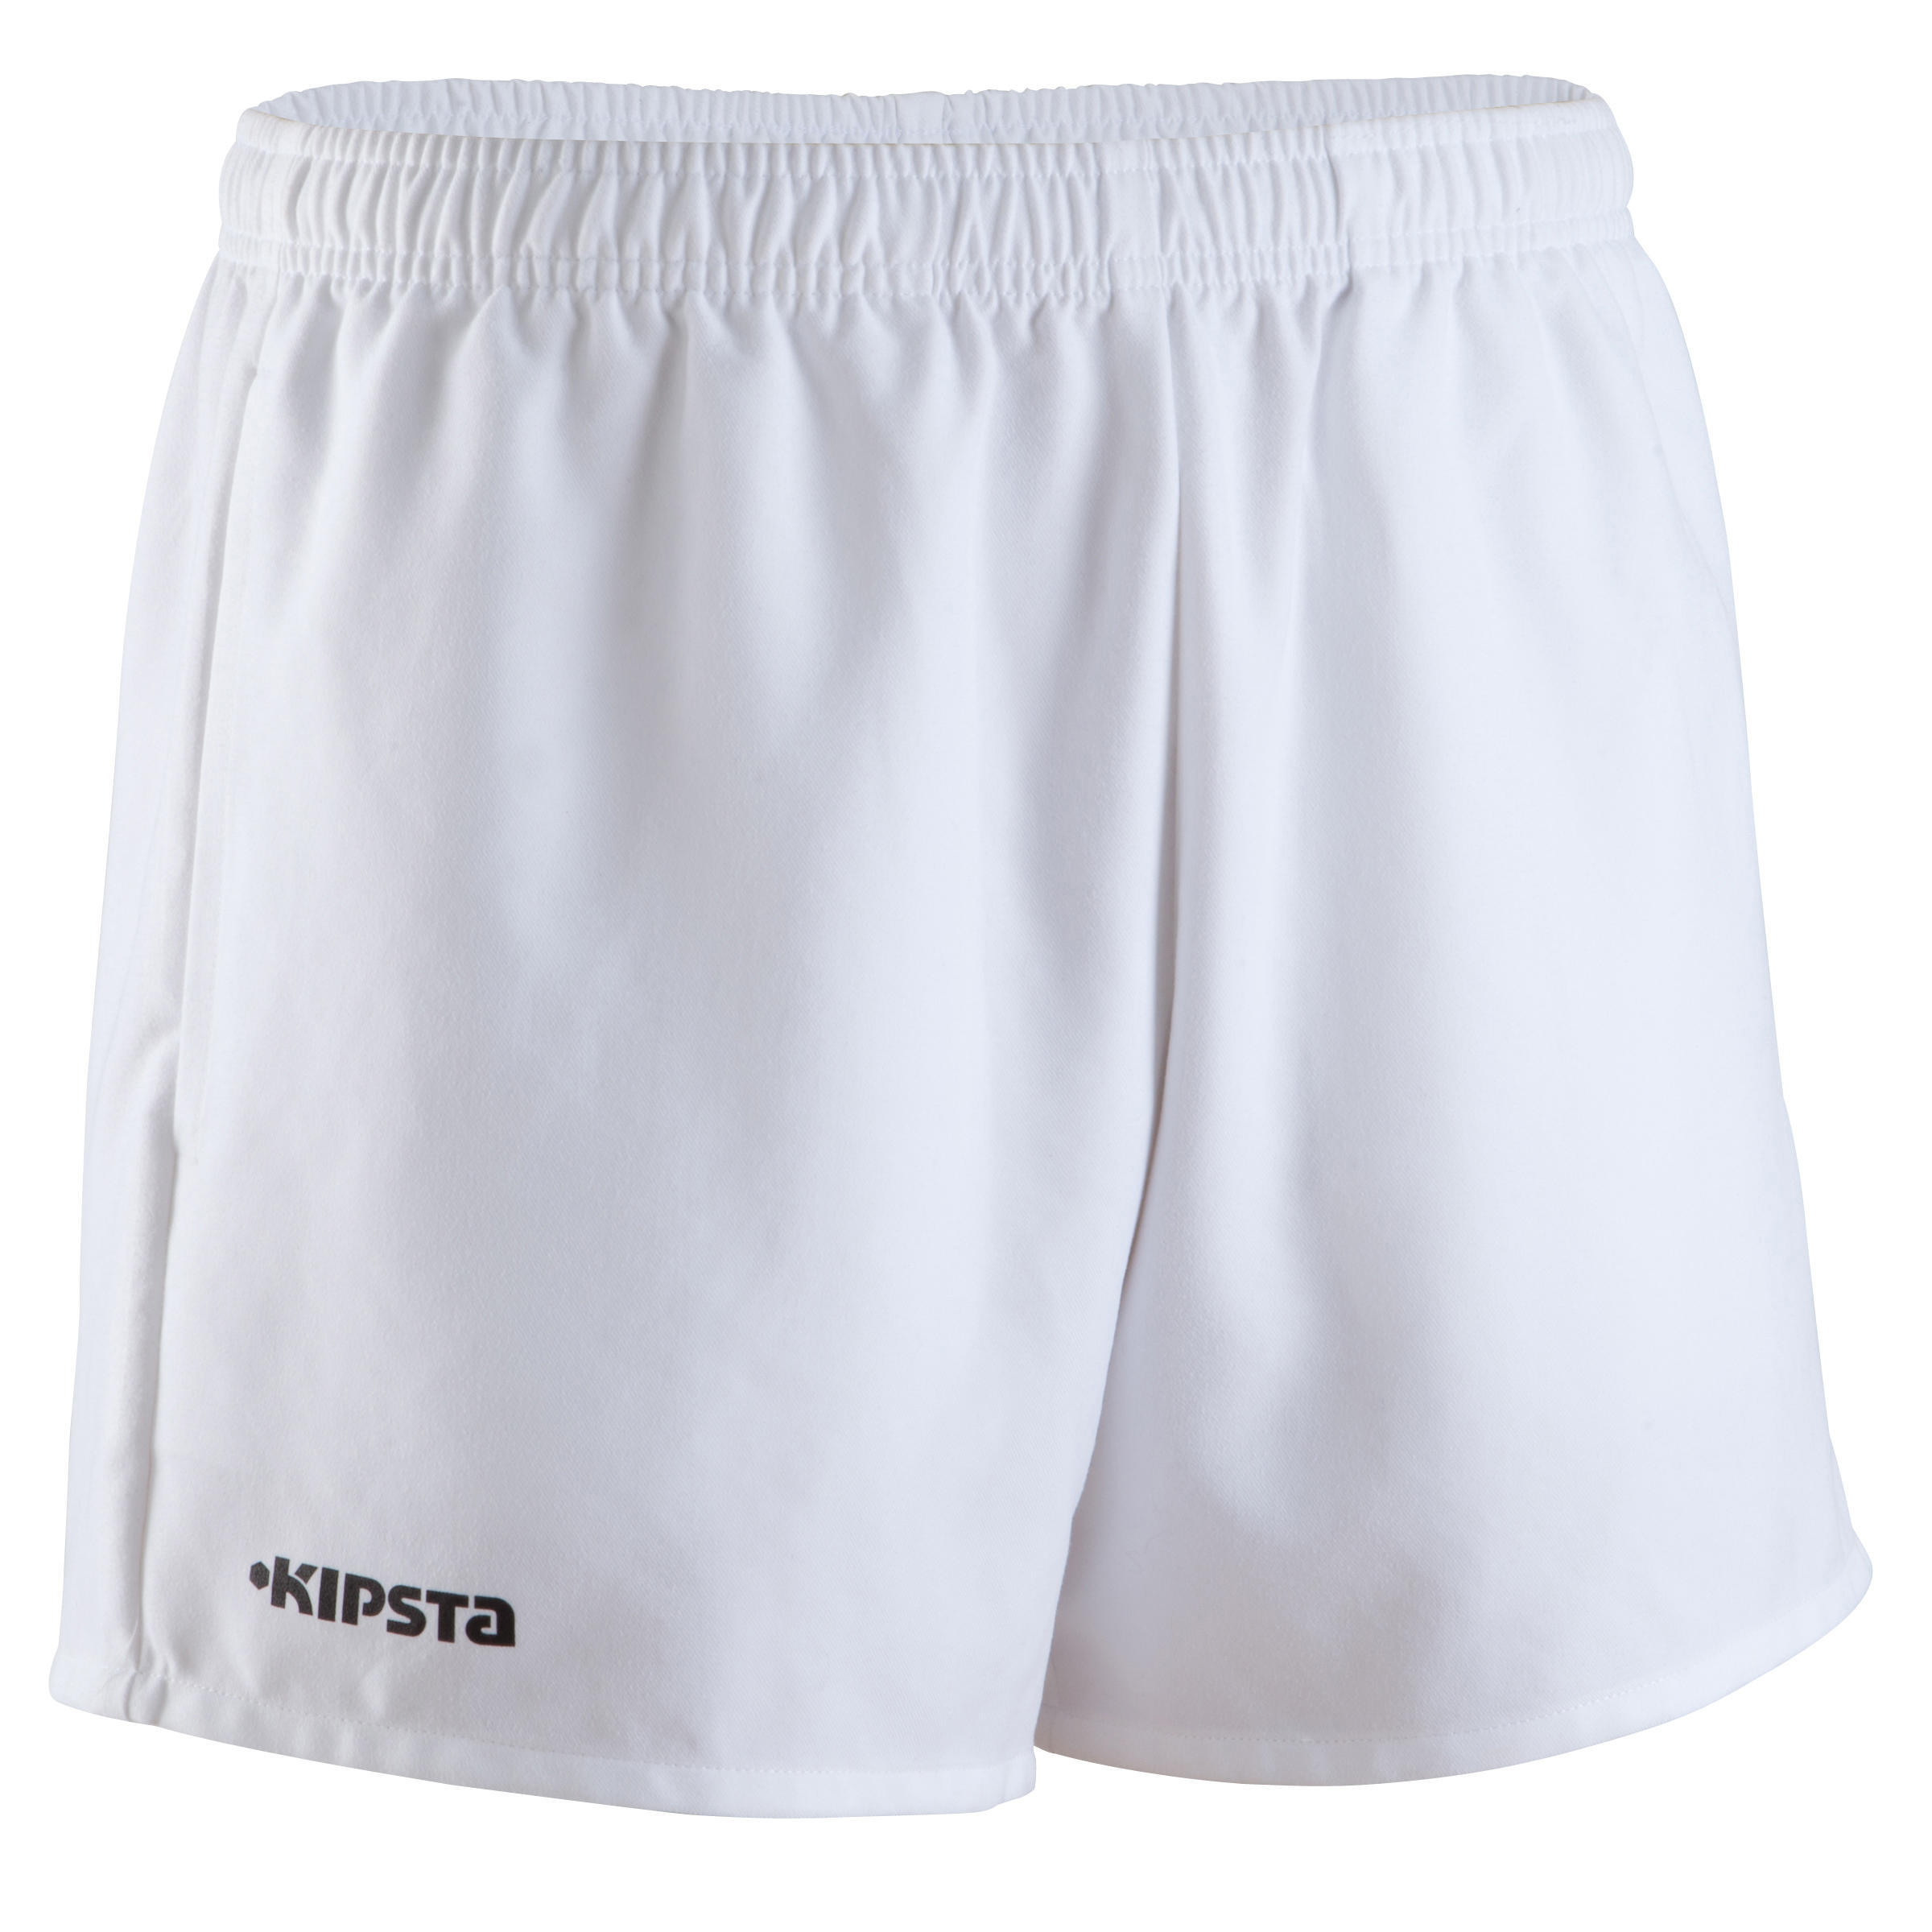 Refurbished Adult Rugby Shorts with Pockets R100 - A Grade 1/7